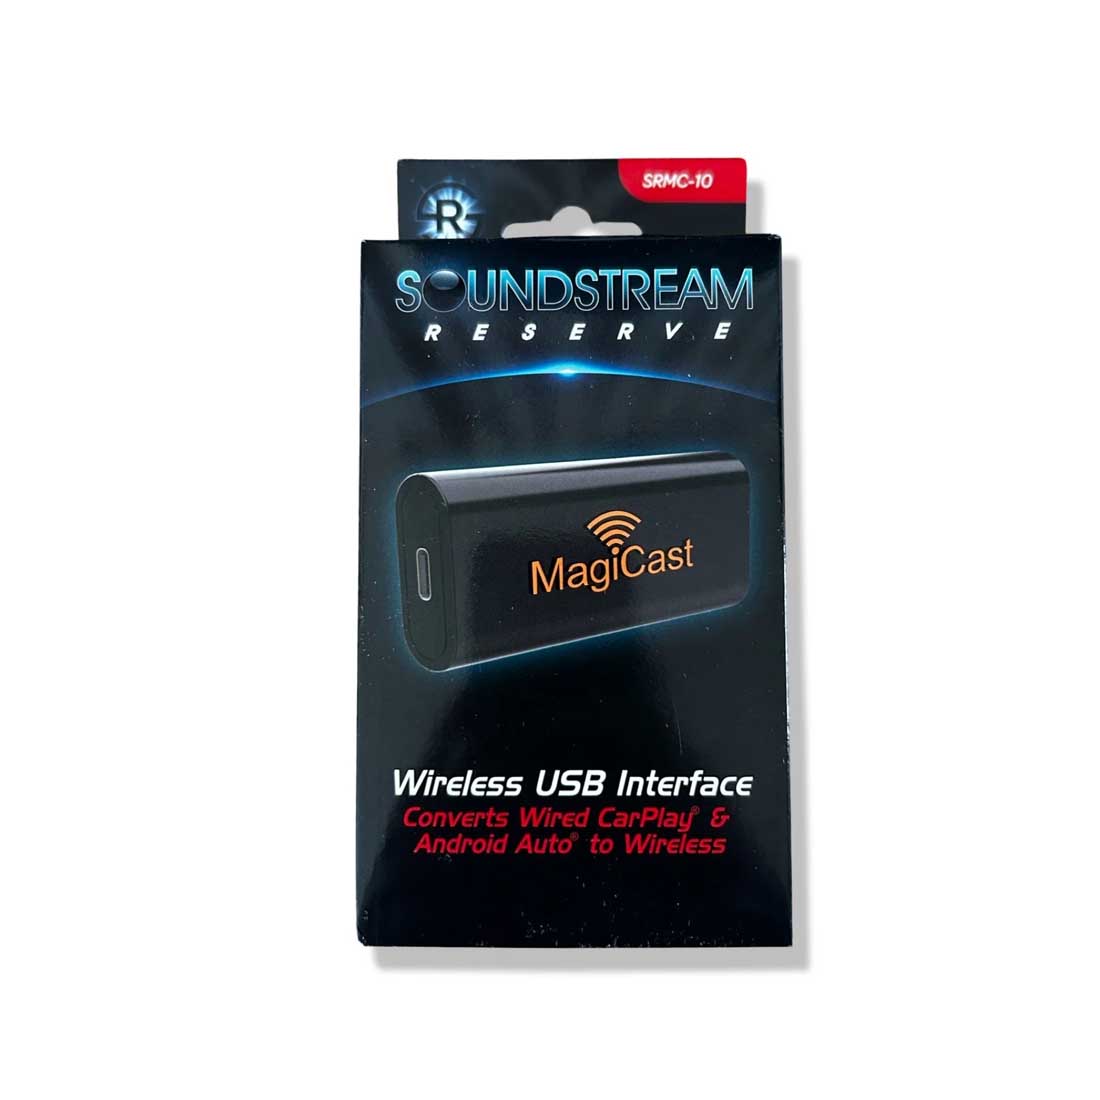 Soundstream SRMC-10 USB Interface for Wireless Apple CarPlay & Android Auto